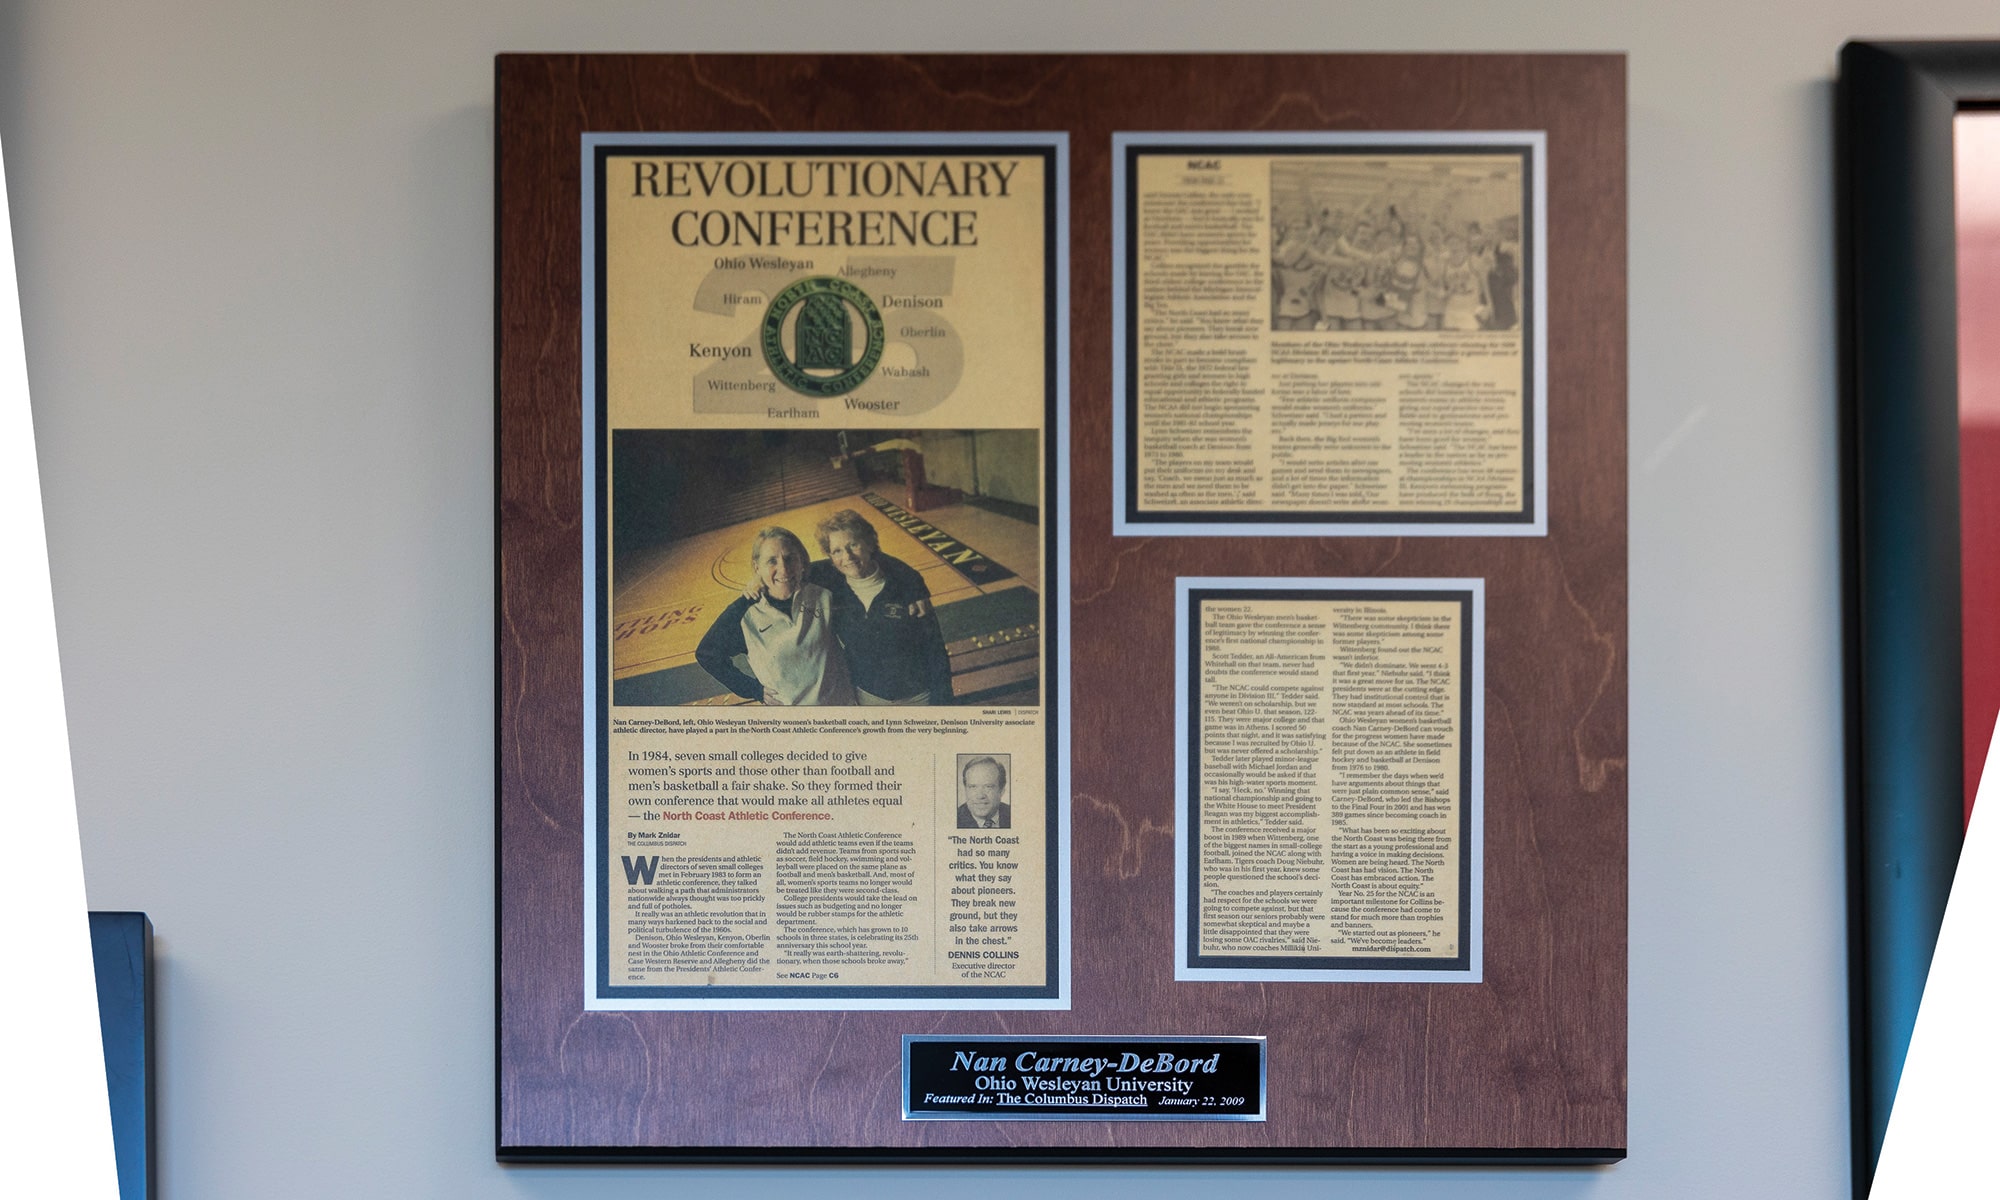 The yellowed newspaper story about the growth of the NCAC with a picture of Carney-DeBord and longtime Denison coach and administrator Lynn Schweizer, arms thrown over each other’s shoulders.